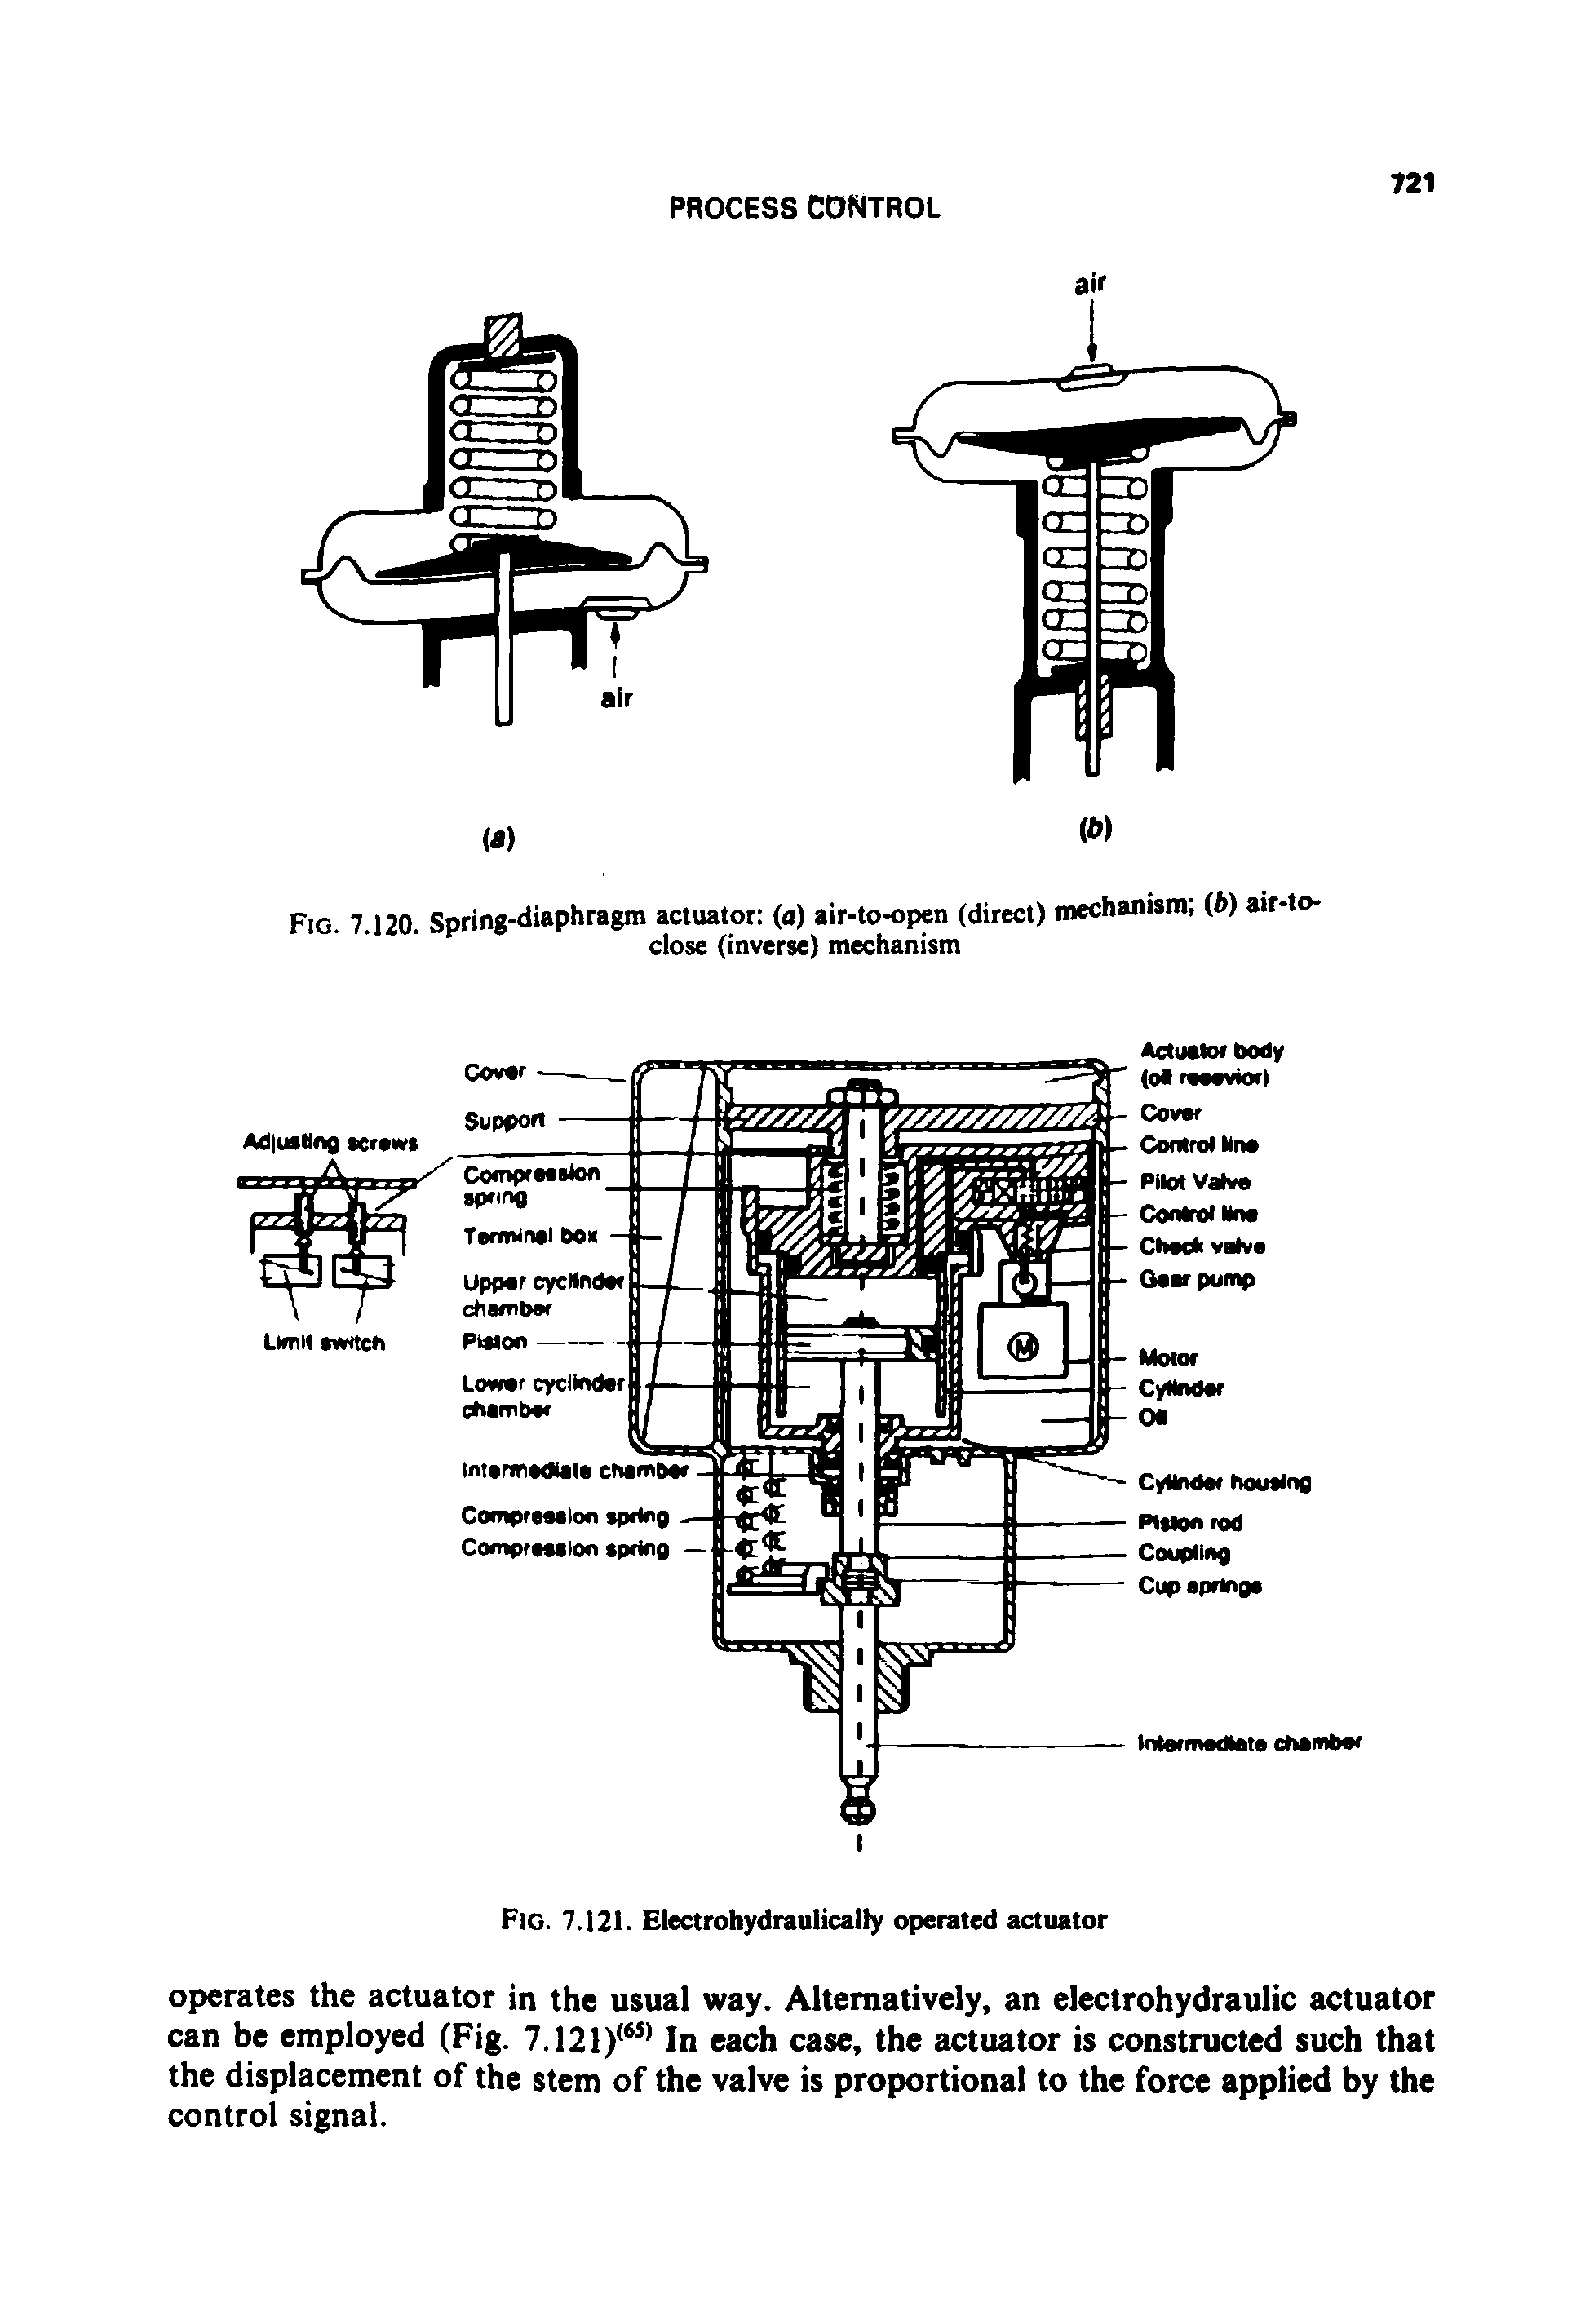 Fig. 7.120. Spring-diaphragm actuator (a) air-to-open (direct) mechanism (6) air-to-close (inverse) mechanism...